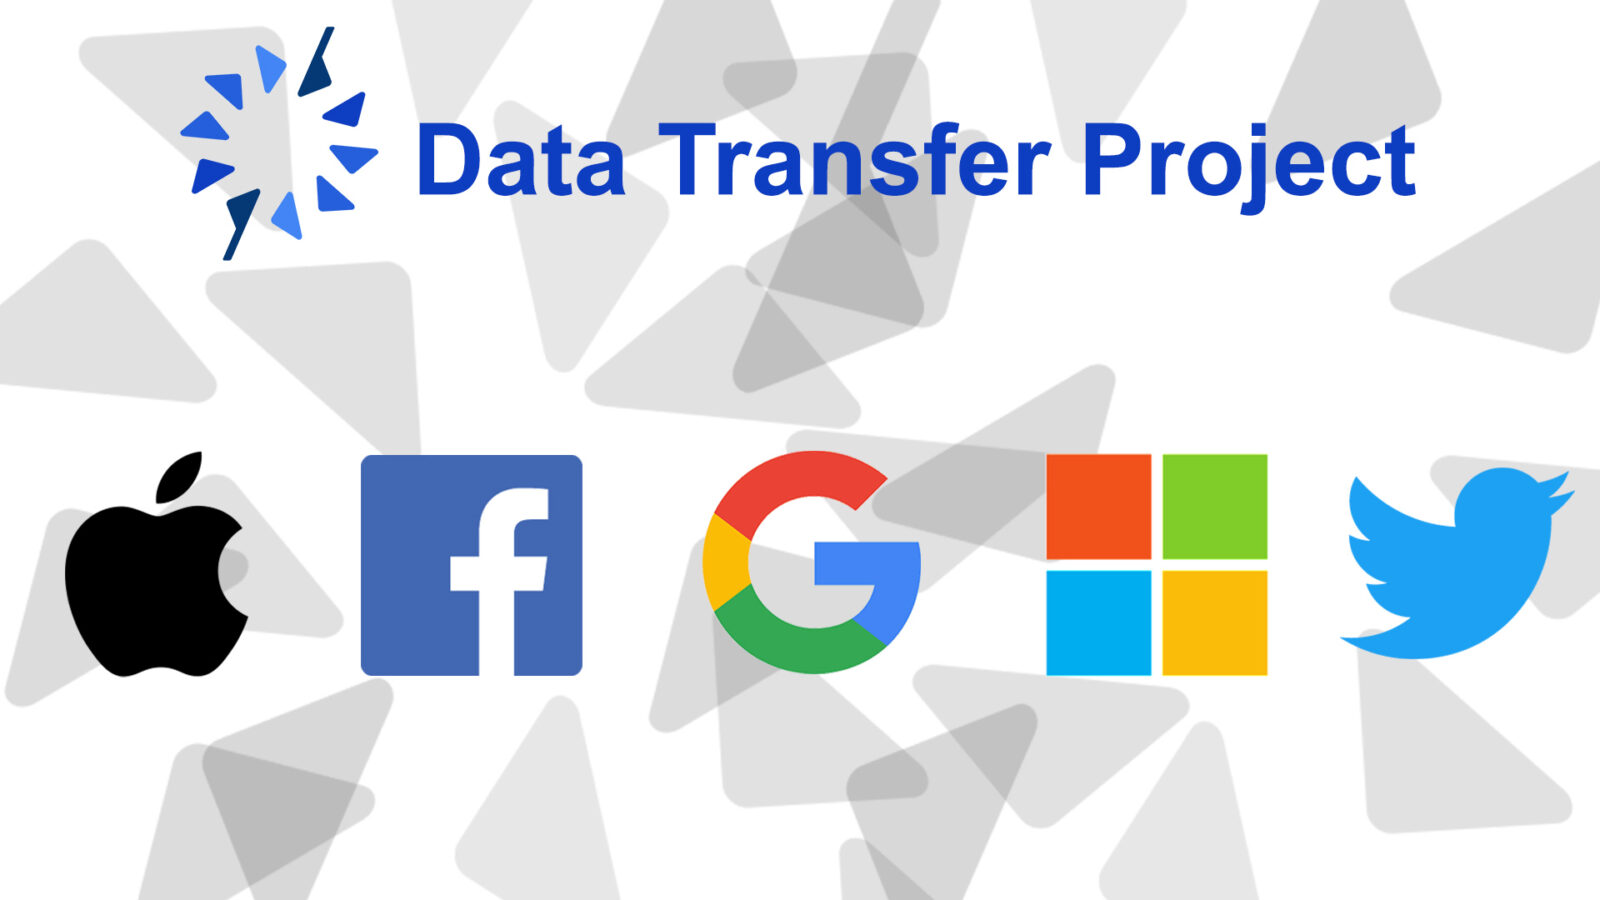 Google joins data transfer project